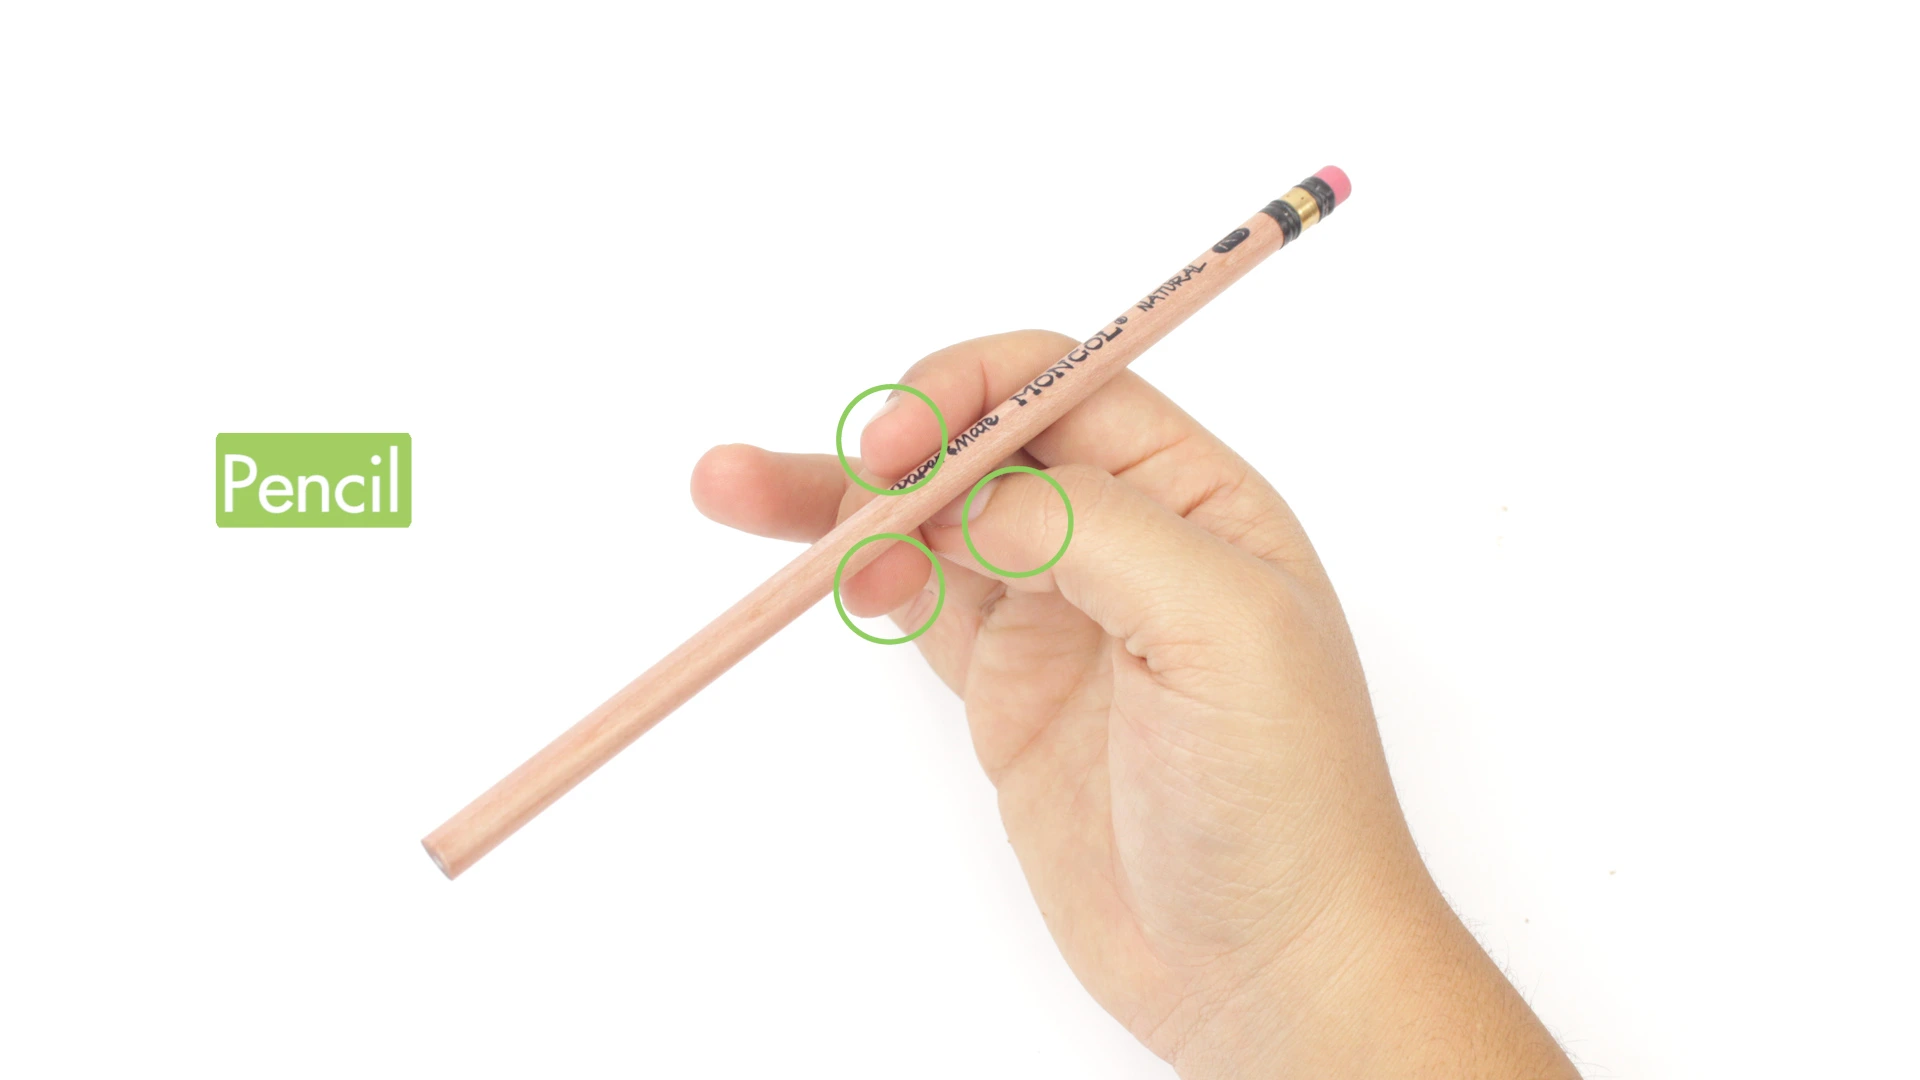 How to Spin a Pen Using Your Thumb?